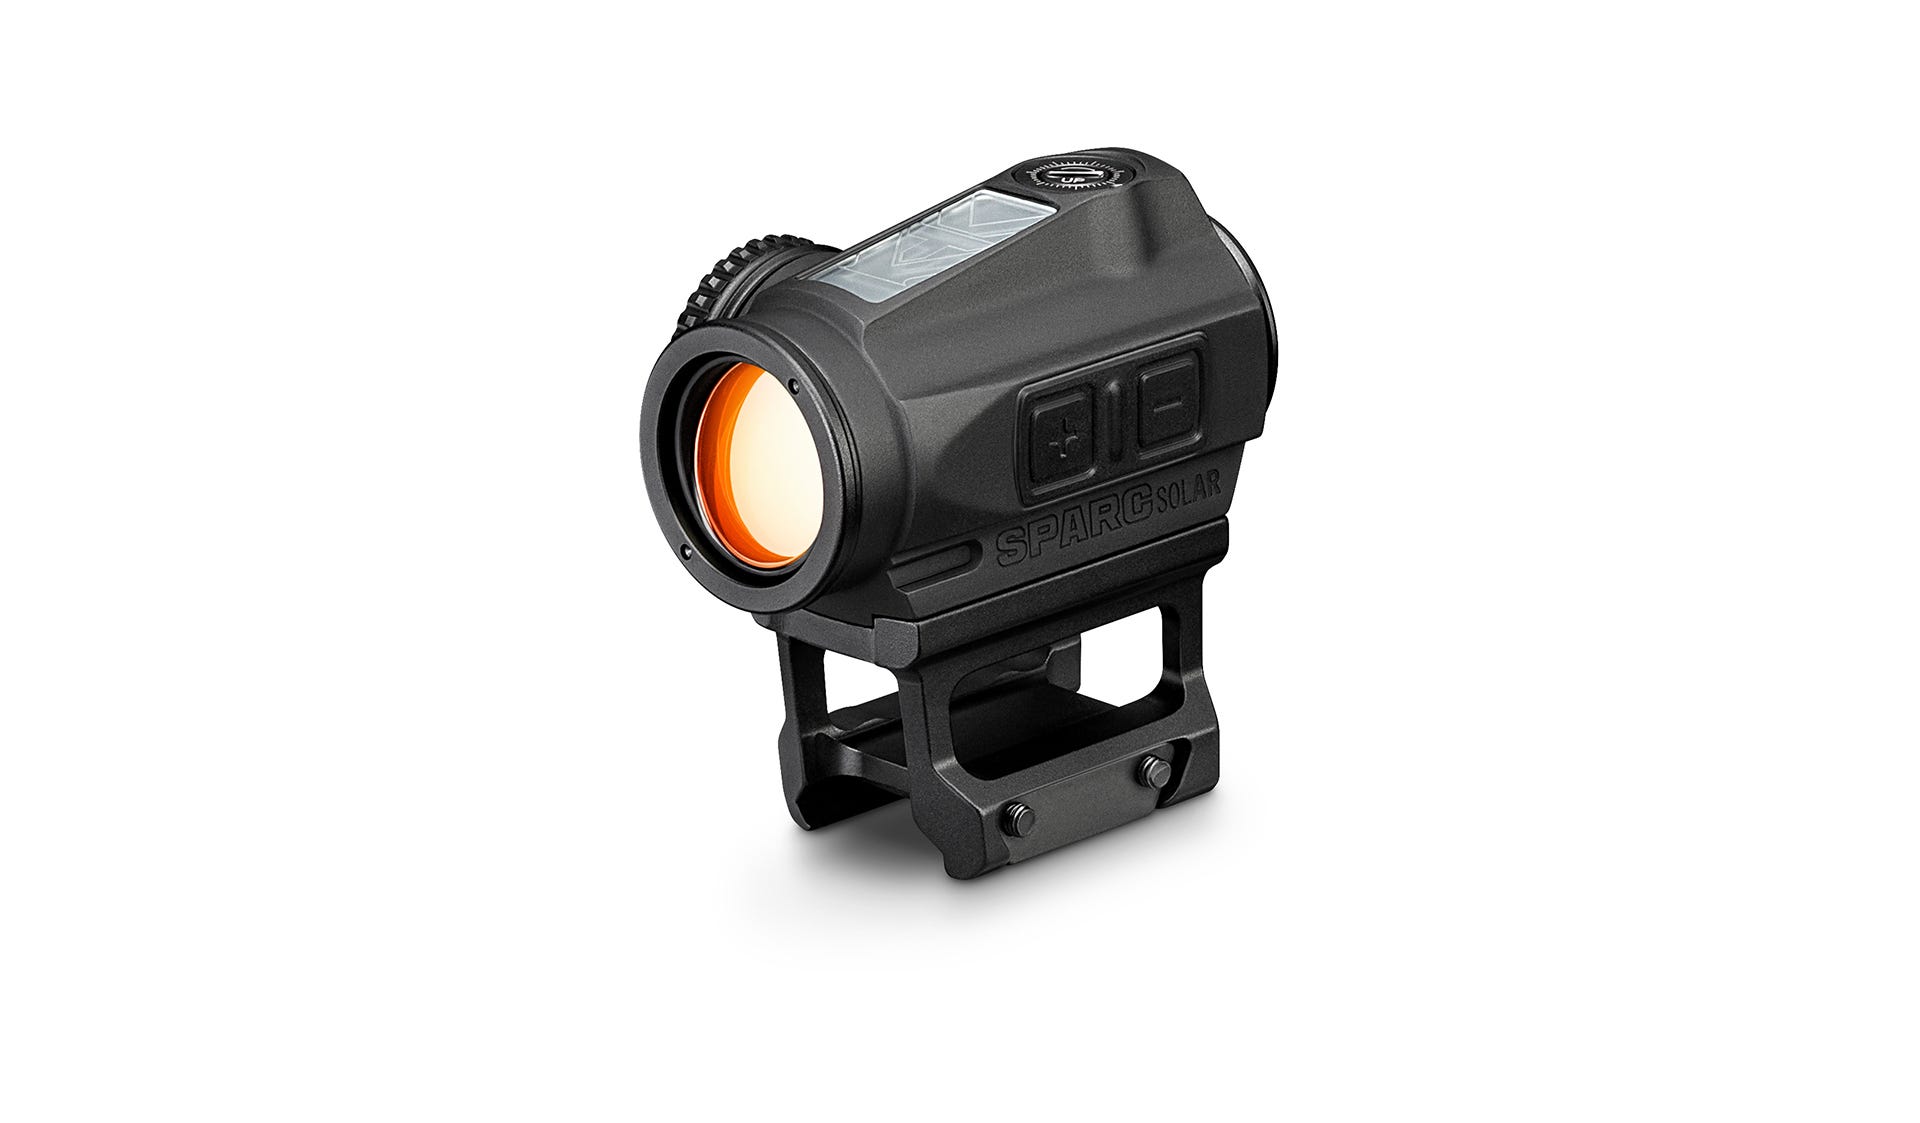 Details about   Vortex SPARC SOLAR 2 MOA Bright Red Dot Sight 